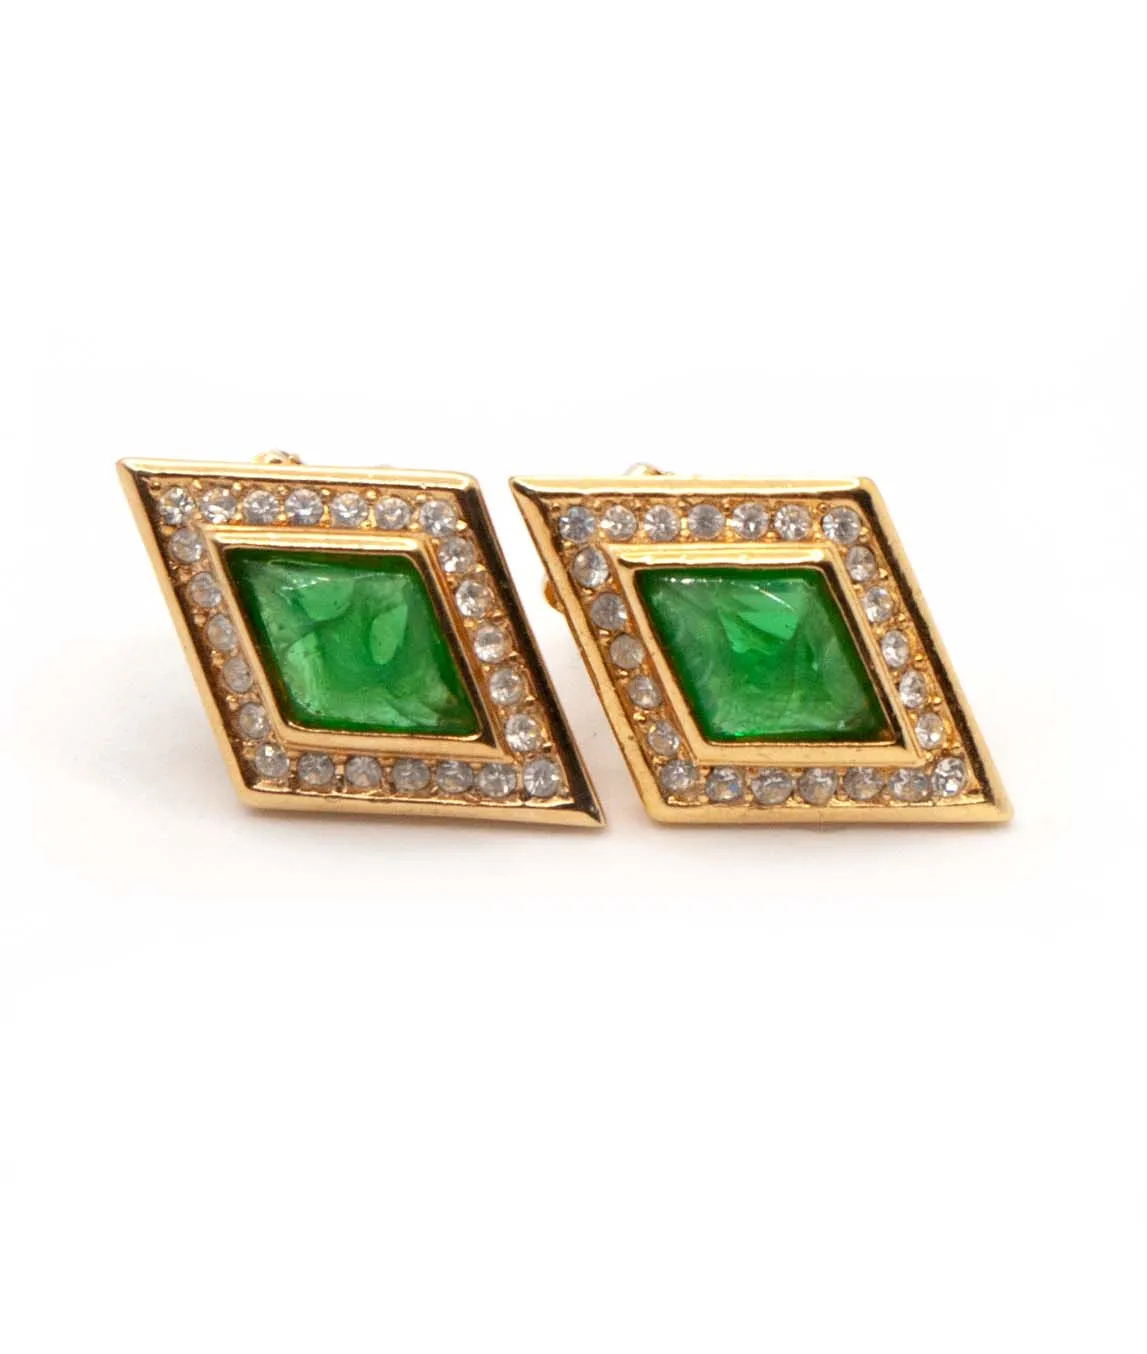 Vintage Christian Dior clip earrings with flawed emerald art glass